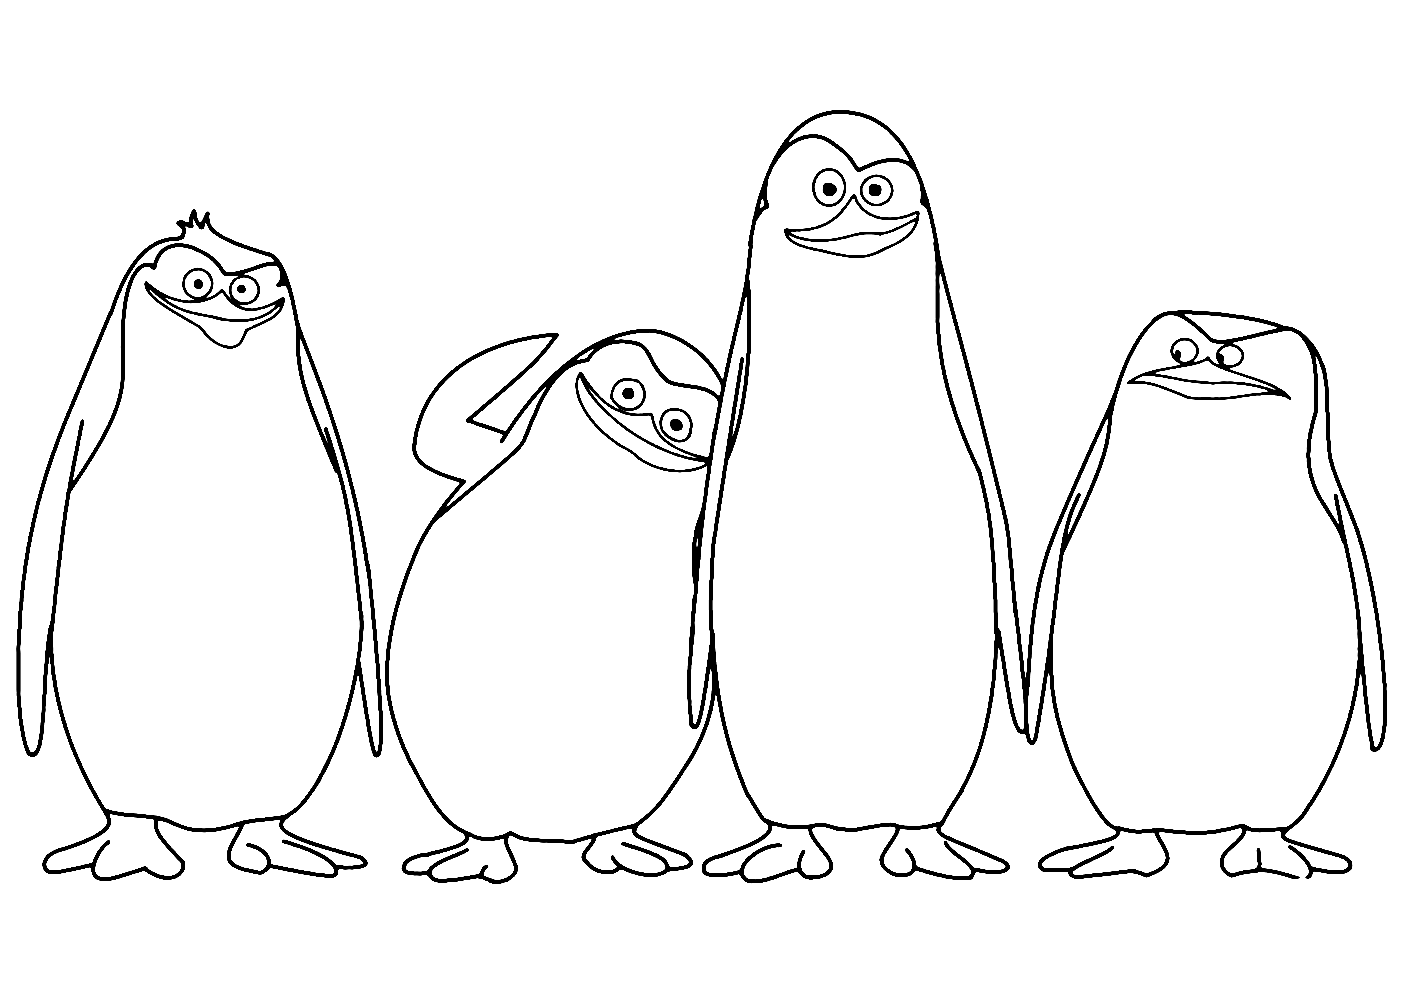 Printable Penguins of Madagascar Coloring Page